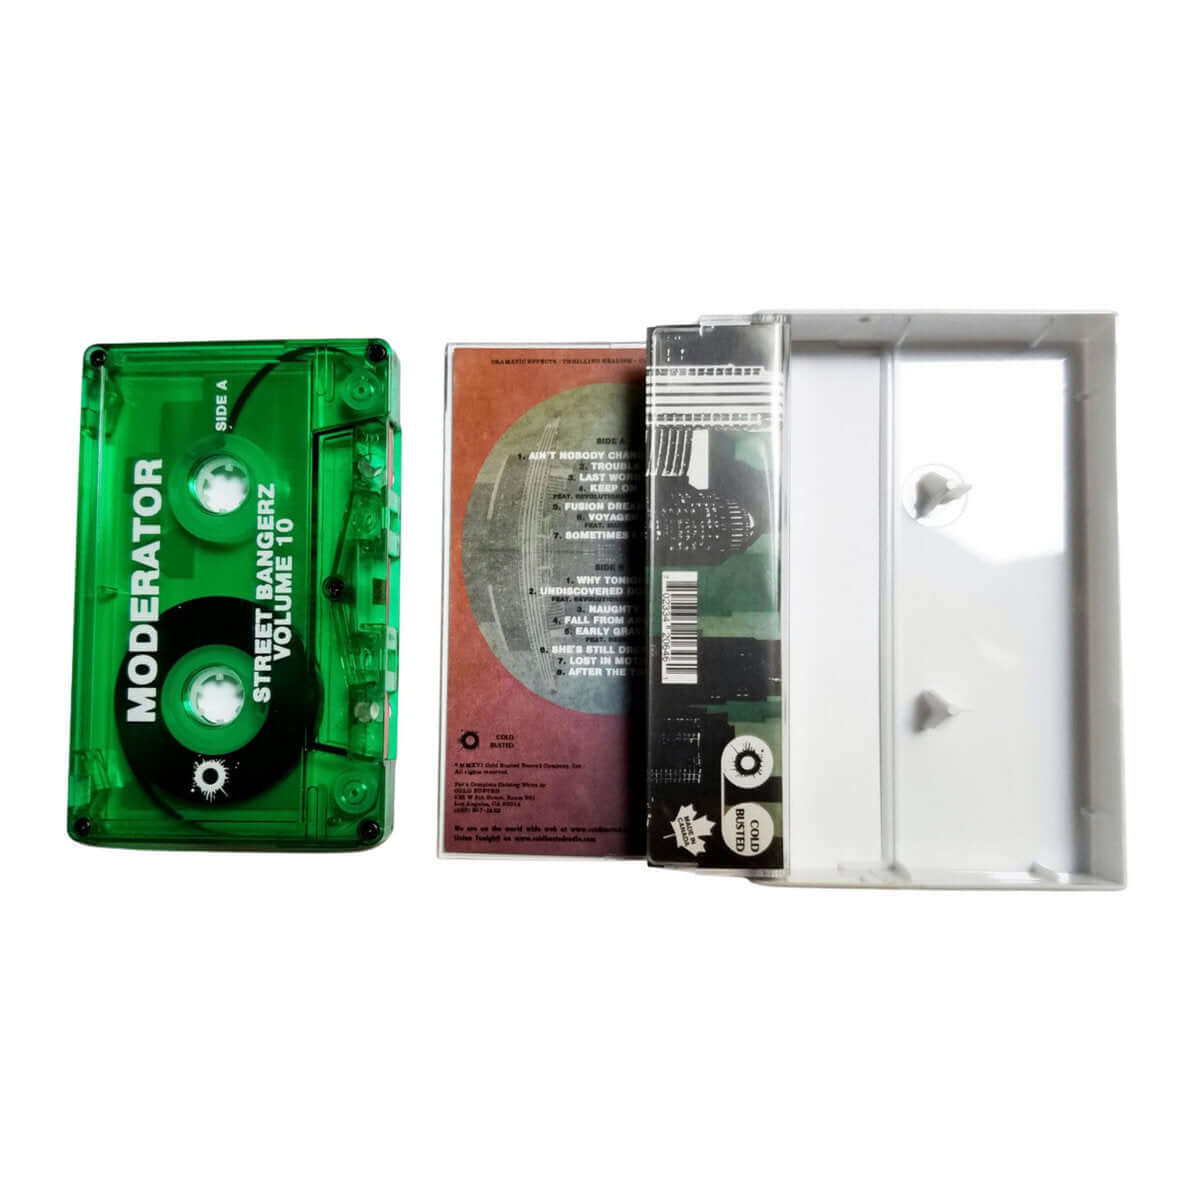 Moderator - Street Bangerz Volume 10 - Limited Edition Cassette (CSD 2016) - Cold Busted